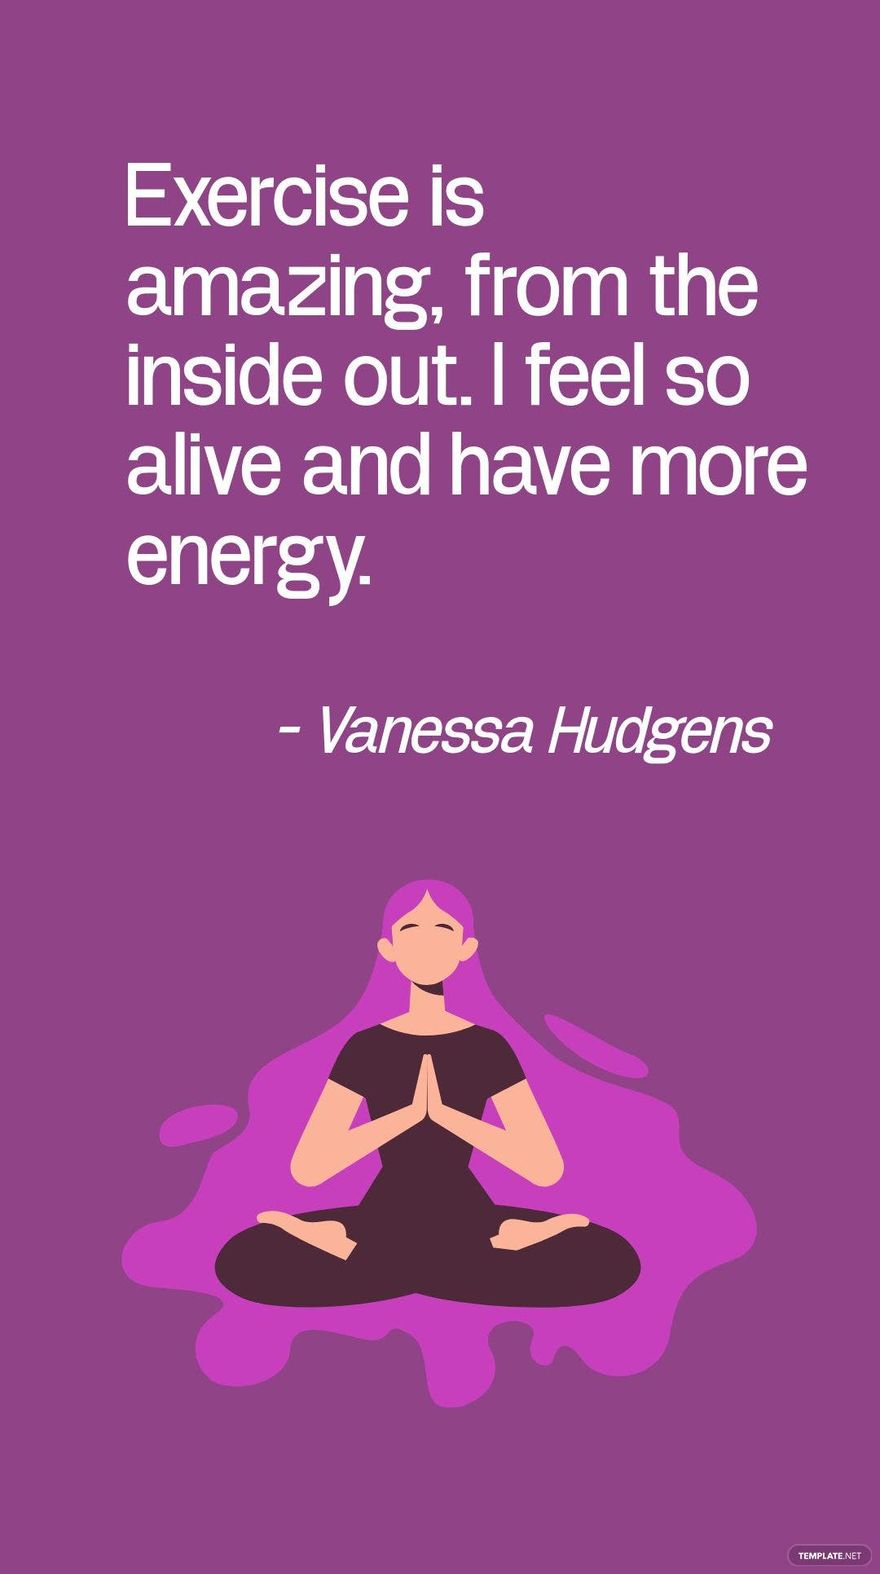 Free Vanessa Hudgens - Exercise is amazing, from the inside out. I feel so alive and have more energy. in JPG